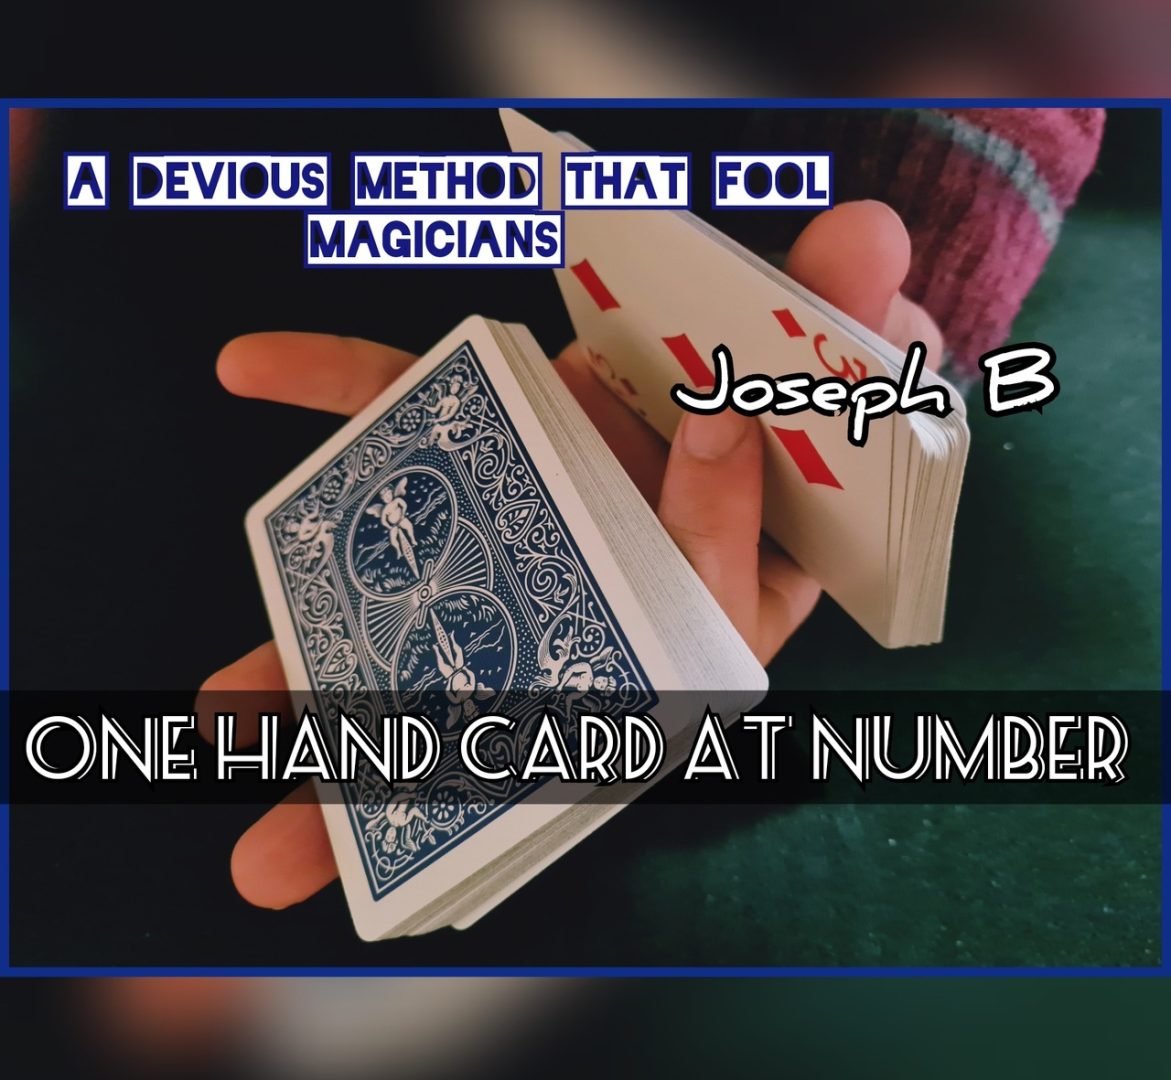 Joseph B - ONE HAND CARD AT NUMBER